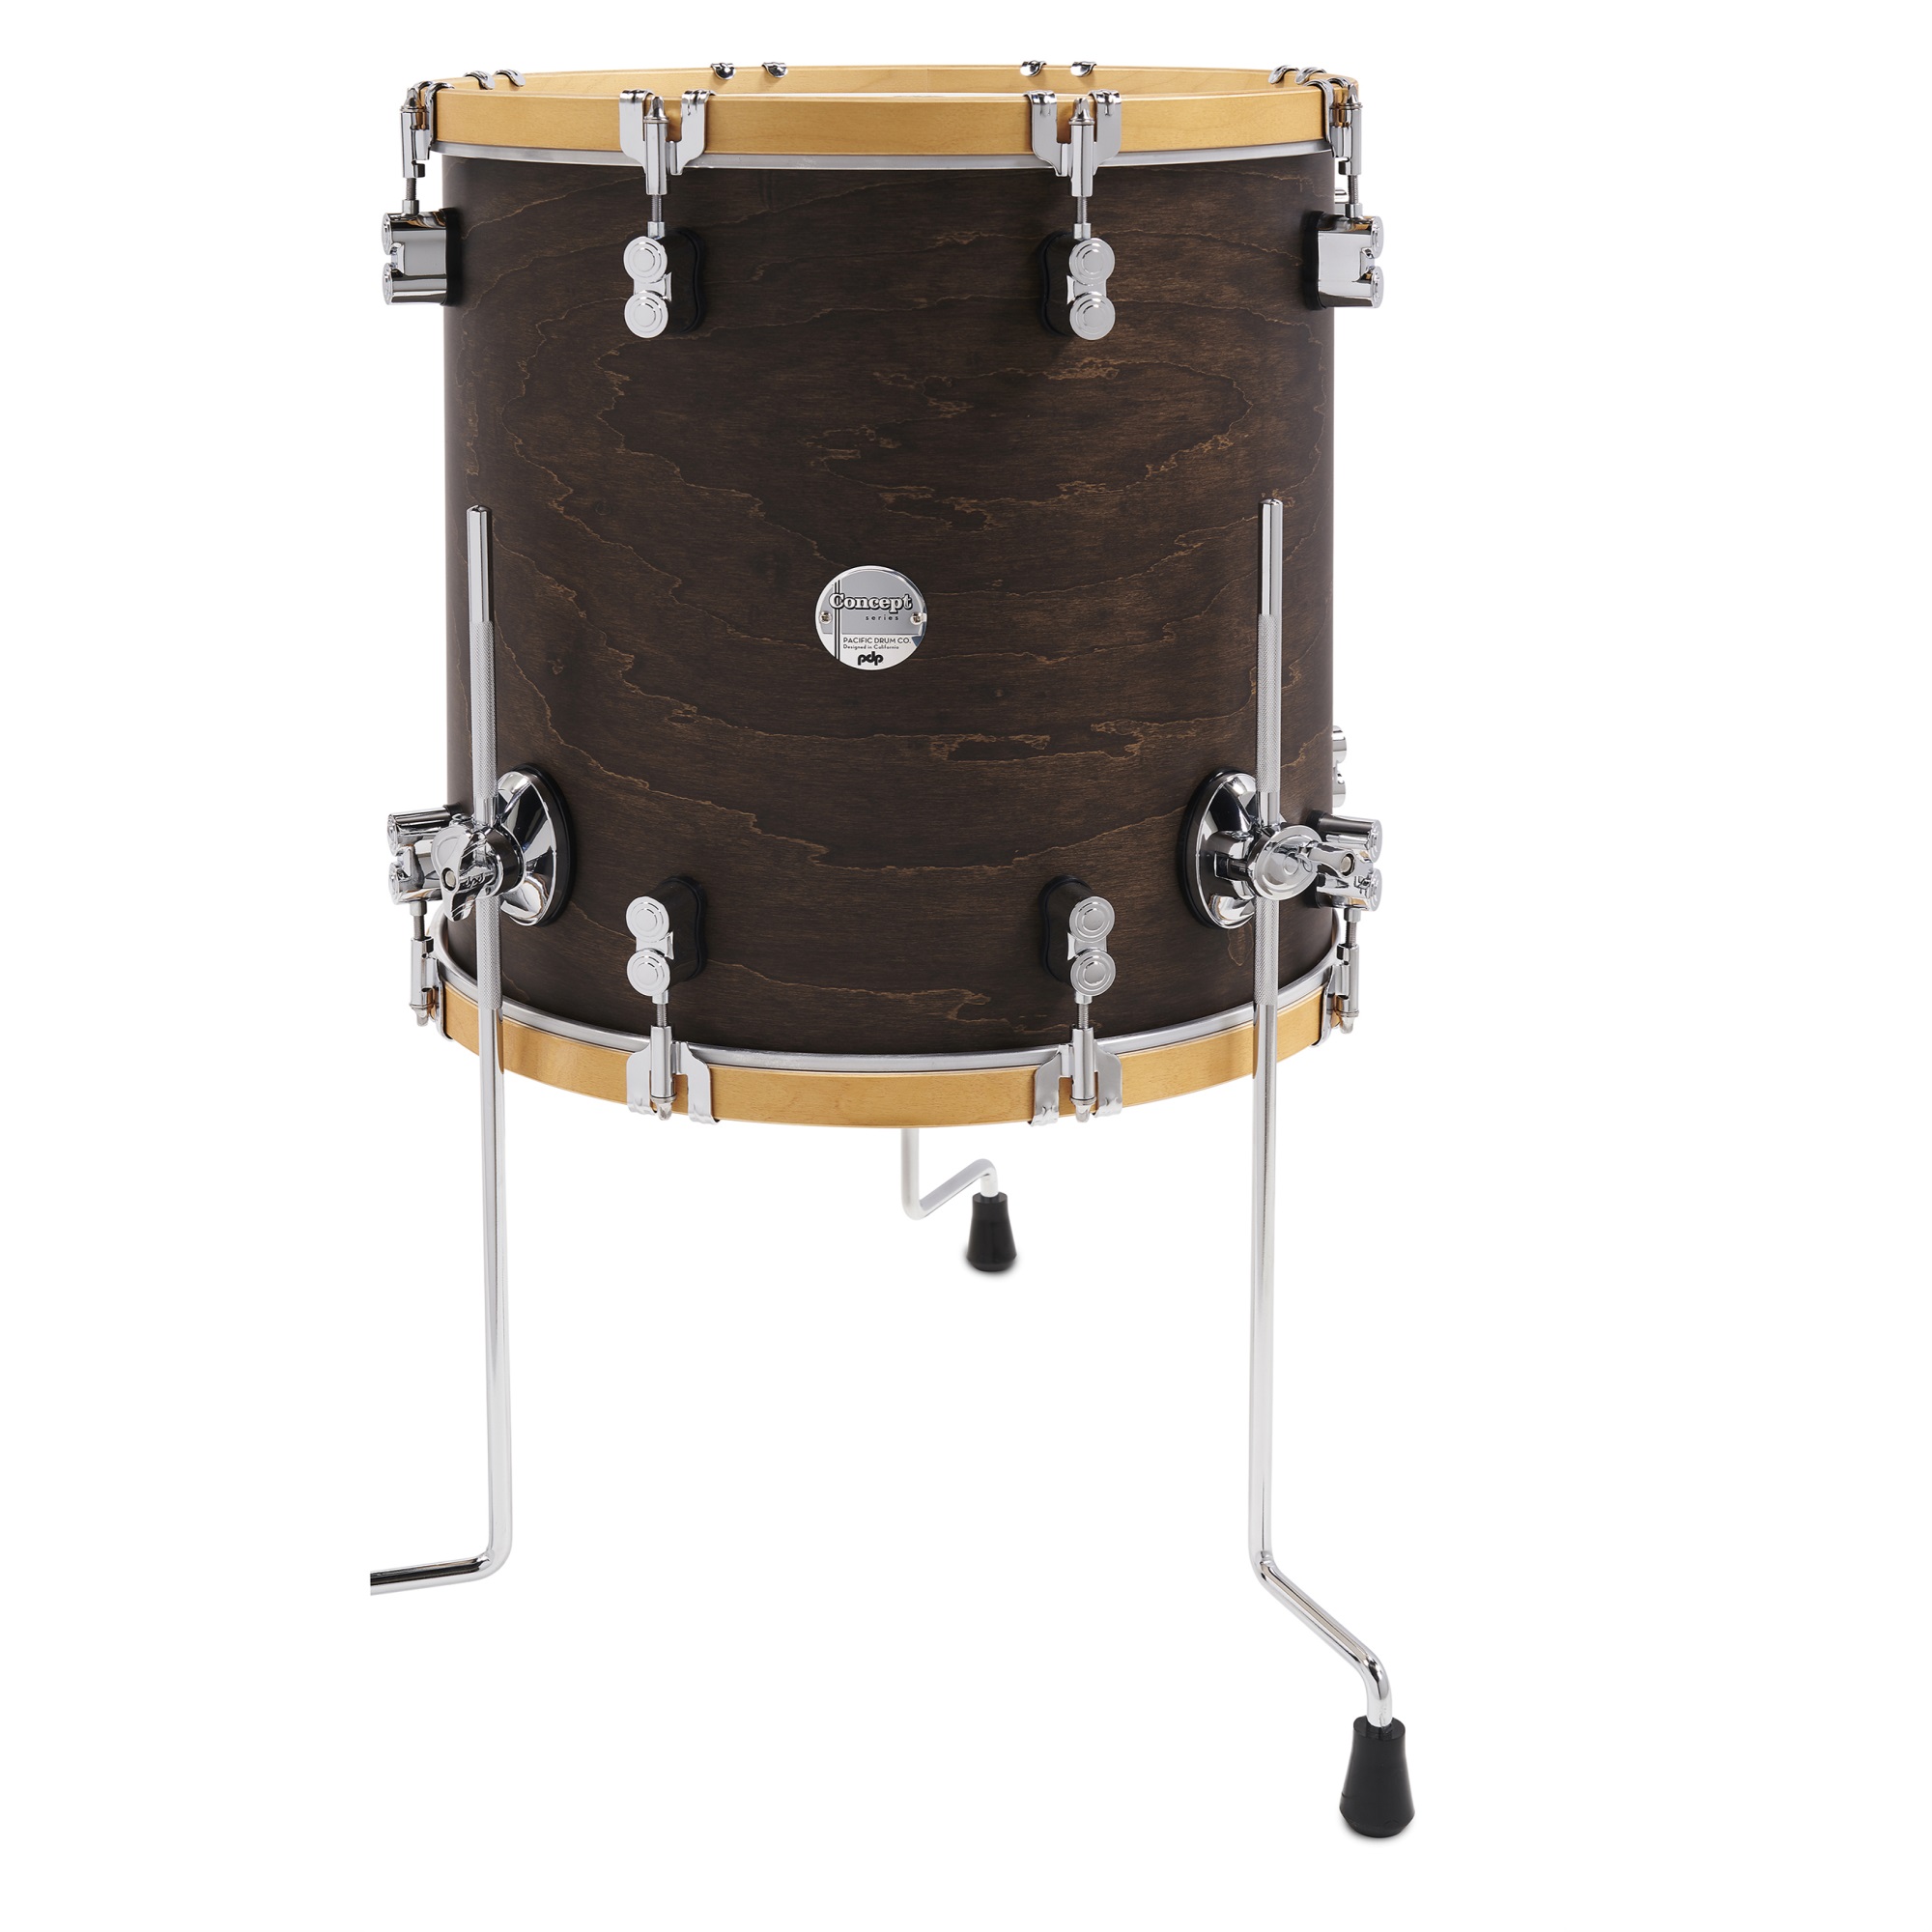 PDP Concept Classic Series 3-Piece Maple Shell Pack, Walnut with Natural Hoops and Chrome Hardware; 9x13, 16x16, 14x26